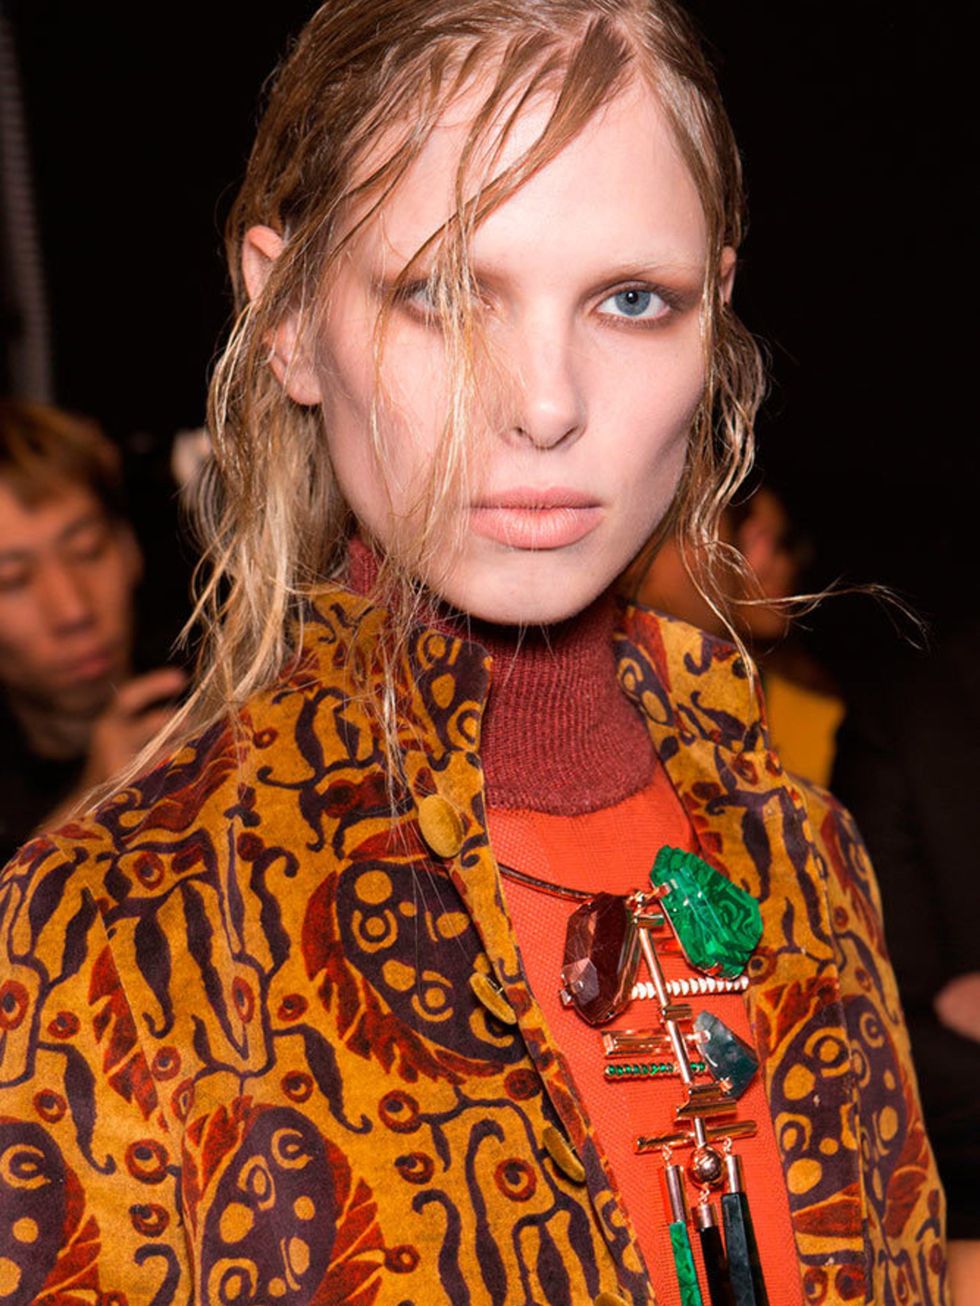 <p><a href="http://www.elleuk.com/catwalk/just-cavalli/autumn-winter-2015"><strong>Just Cavalli</strong></a></p>

<p>The look: Swamp hair</p>

<p>Hair stylist: James Pecis for Moroccanoil</p>

<p>Key products: Moroccanoil Intense Curl Cream, Moroccanoil L